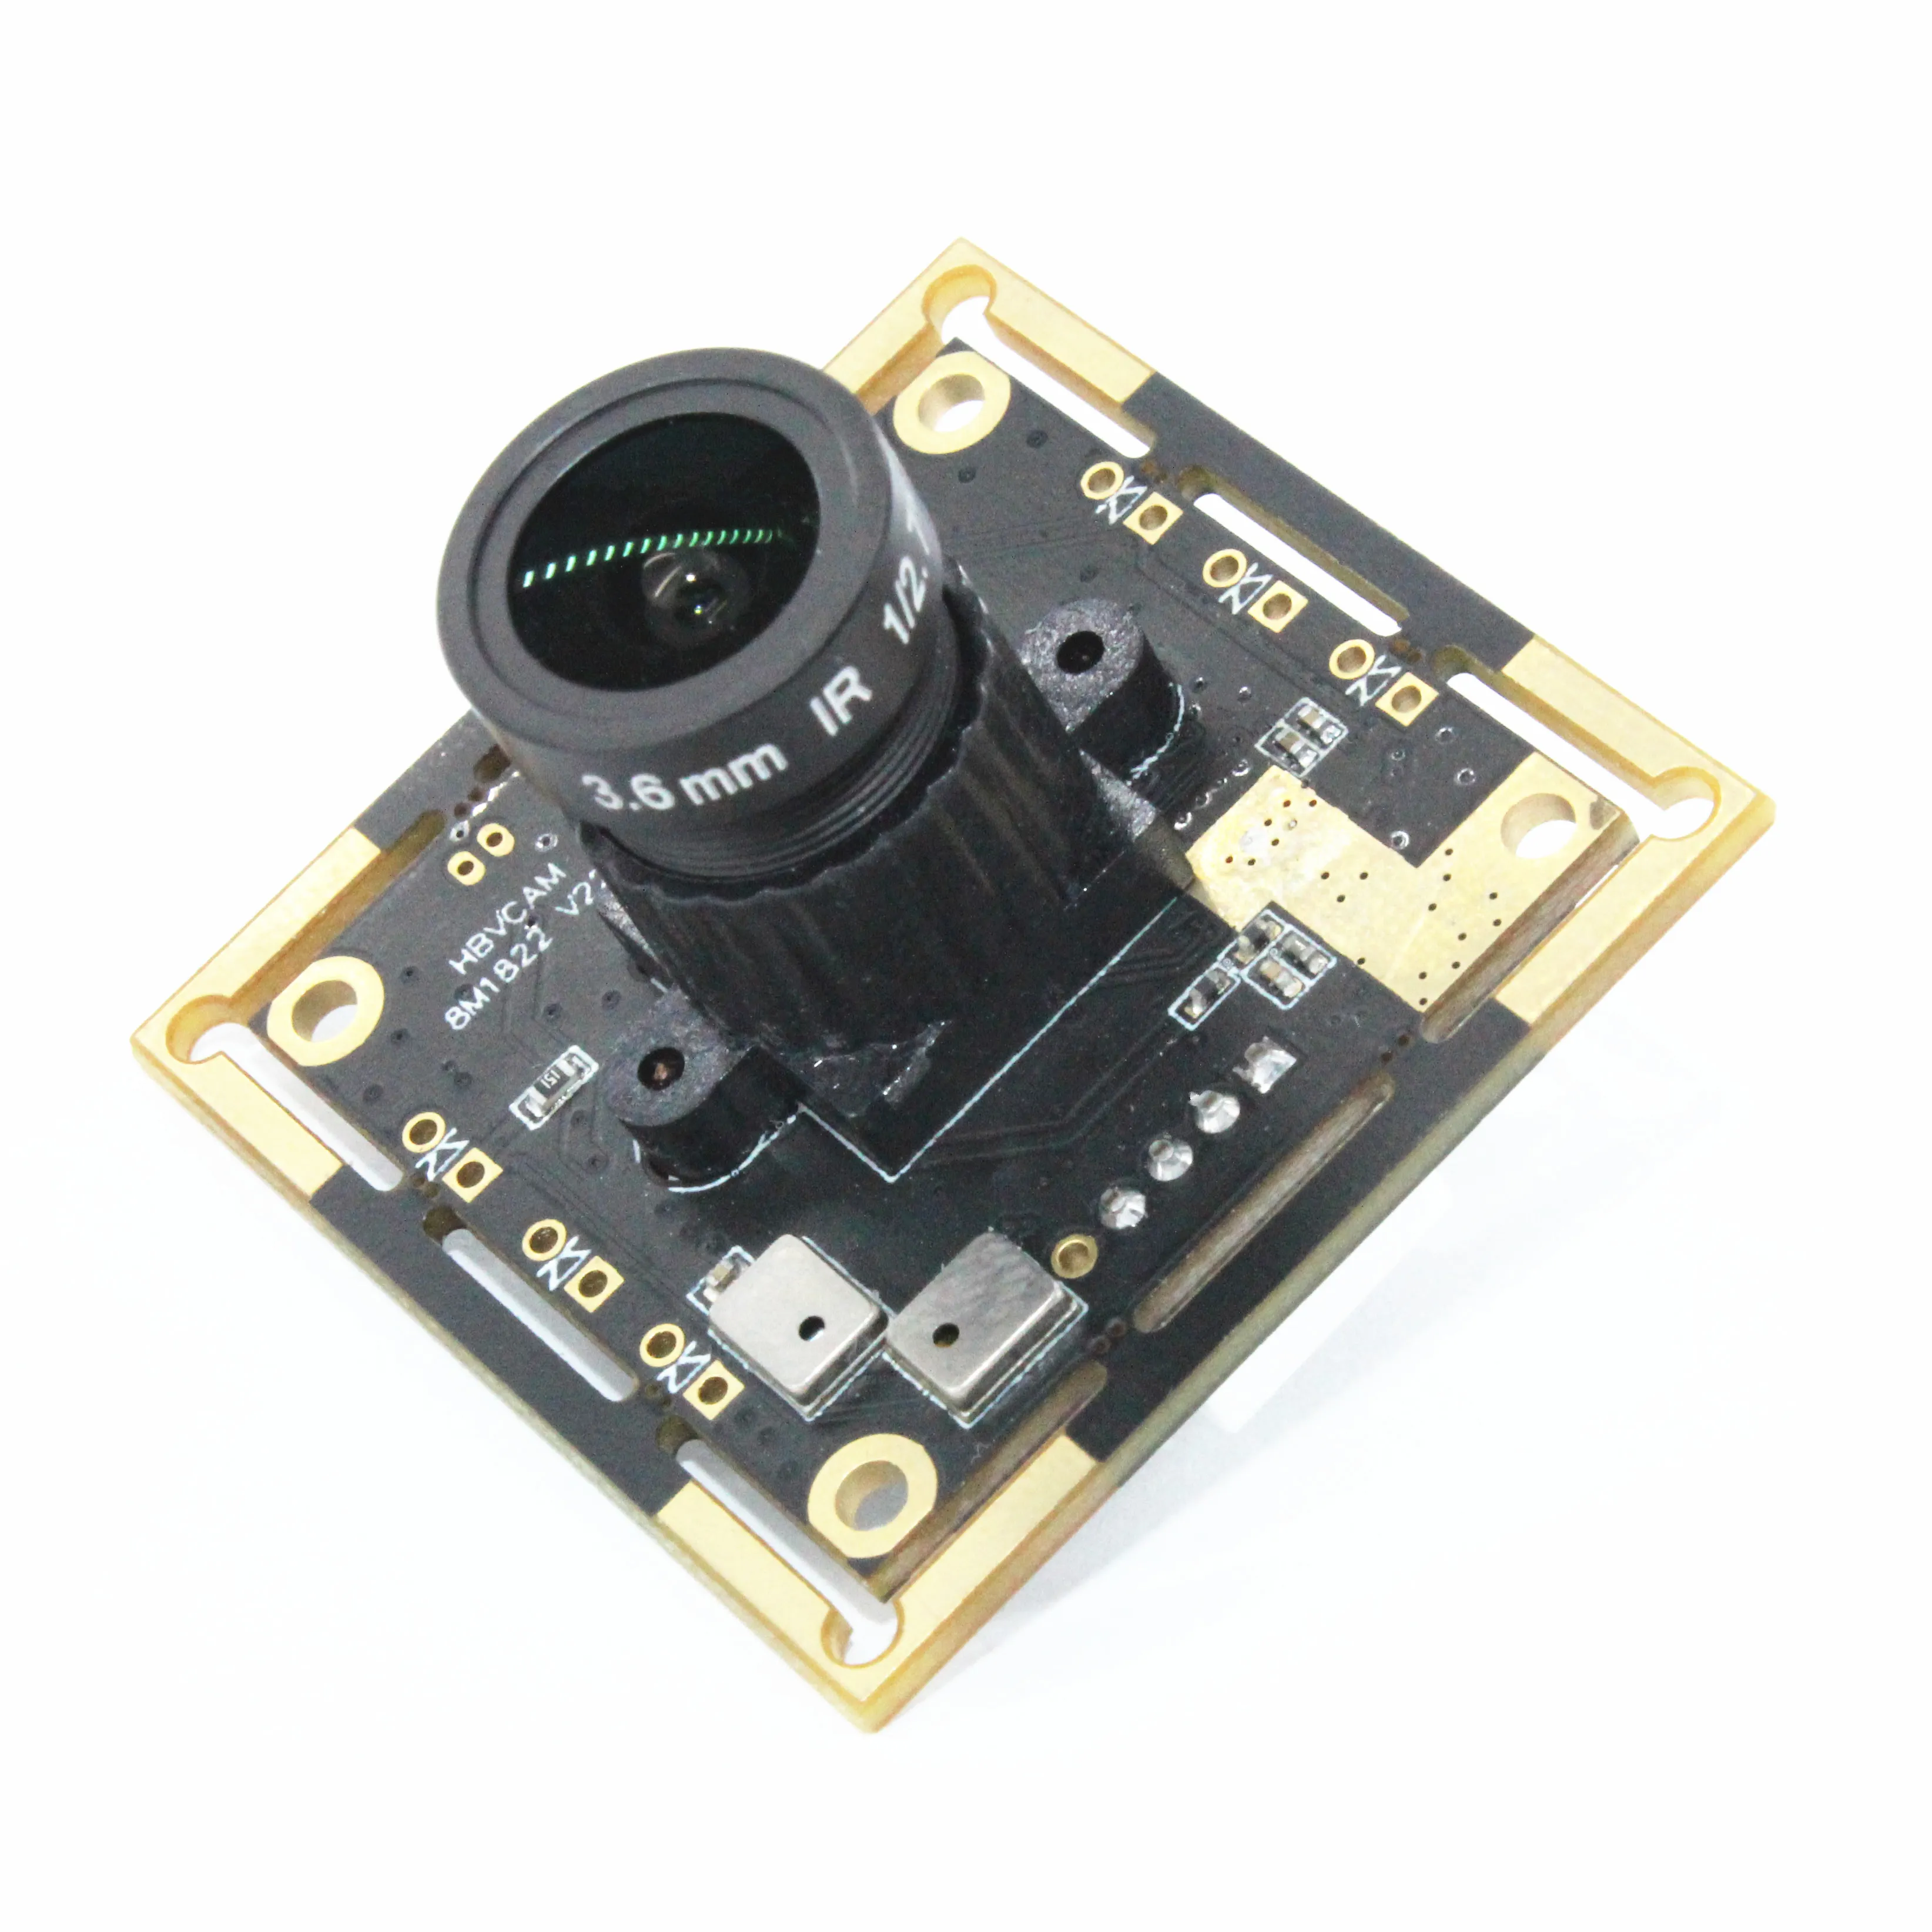 Usb Camera Module New Product 8mp HD IMX179 Small Cmos Oem Usb Ip Camera Module With Microphone And Auto Focus